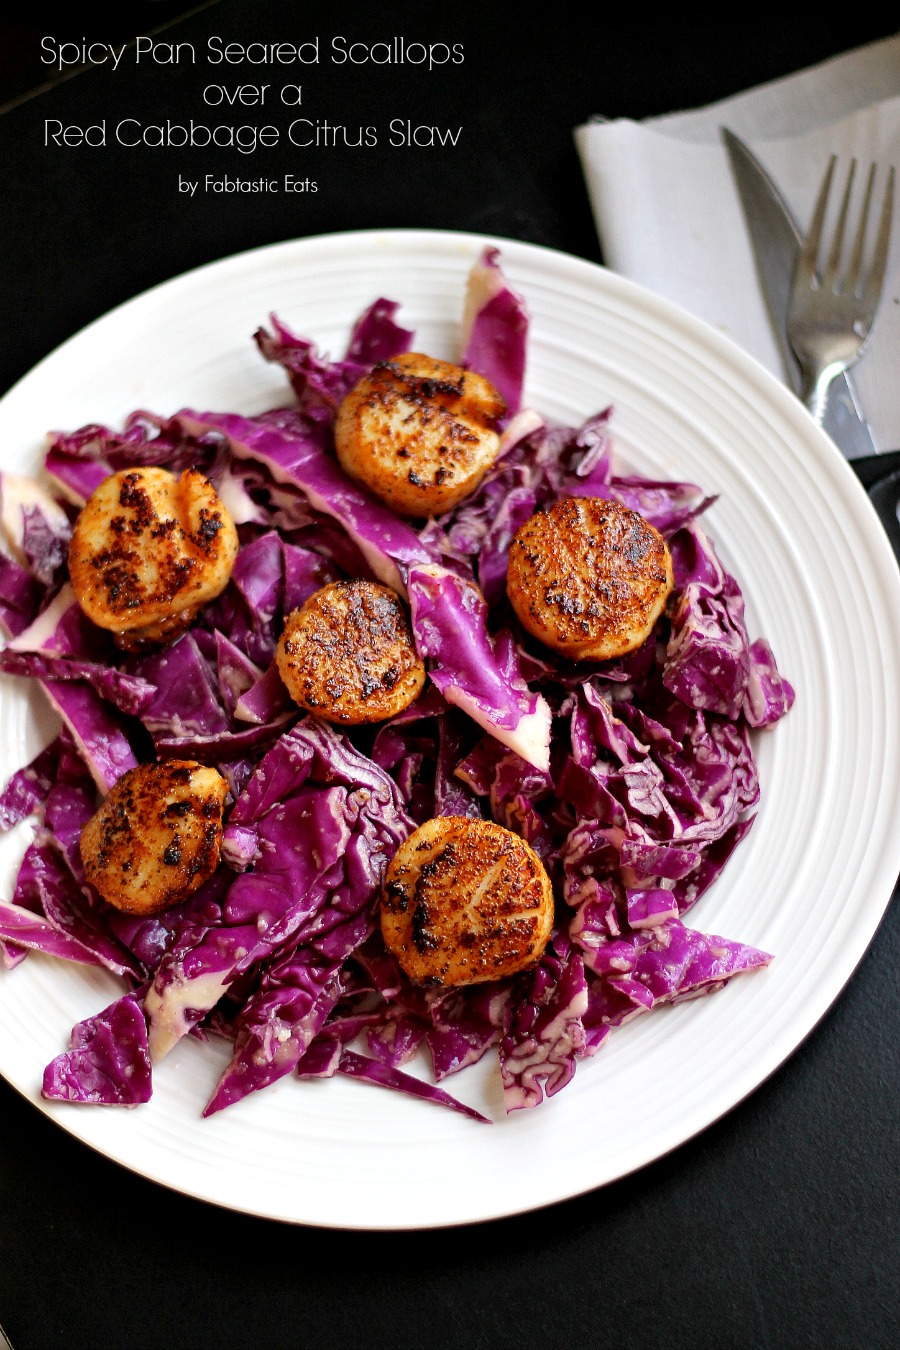 Spicy Pan Seared Scallops over a Red Cabbage Citrus Slaw